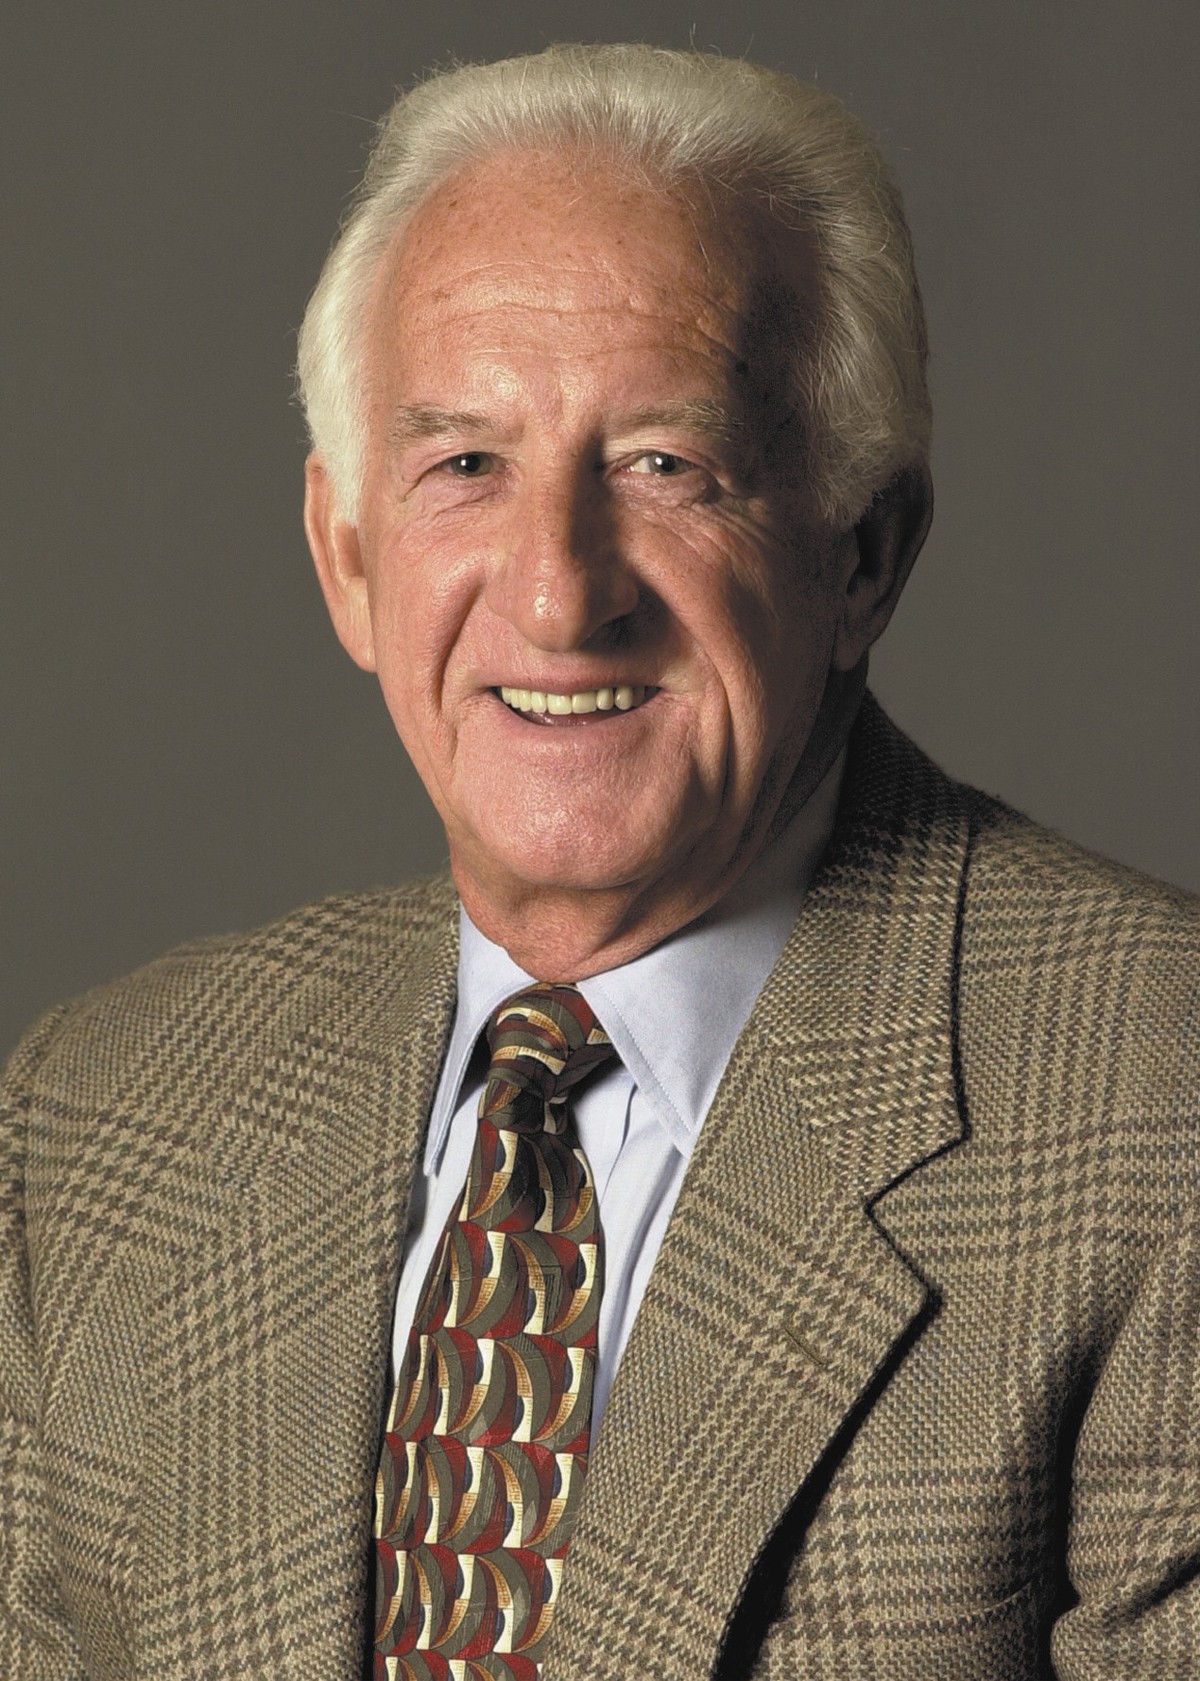 Bob Uecker Speaking Fee and Booking Agent Contact